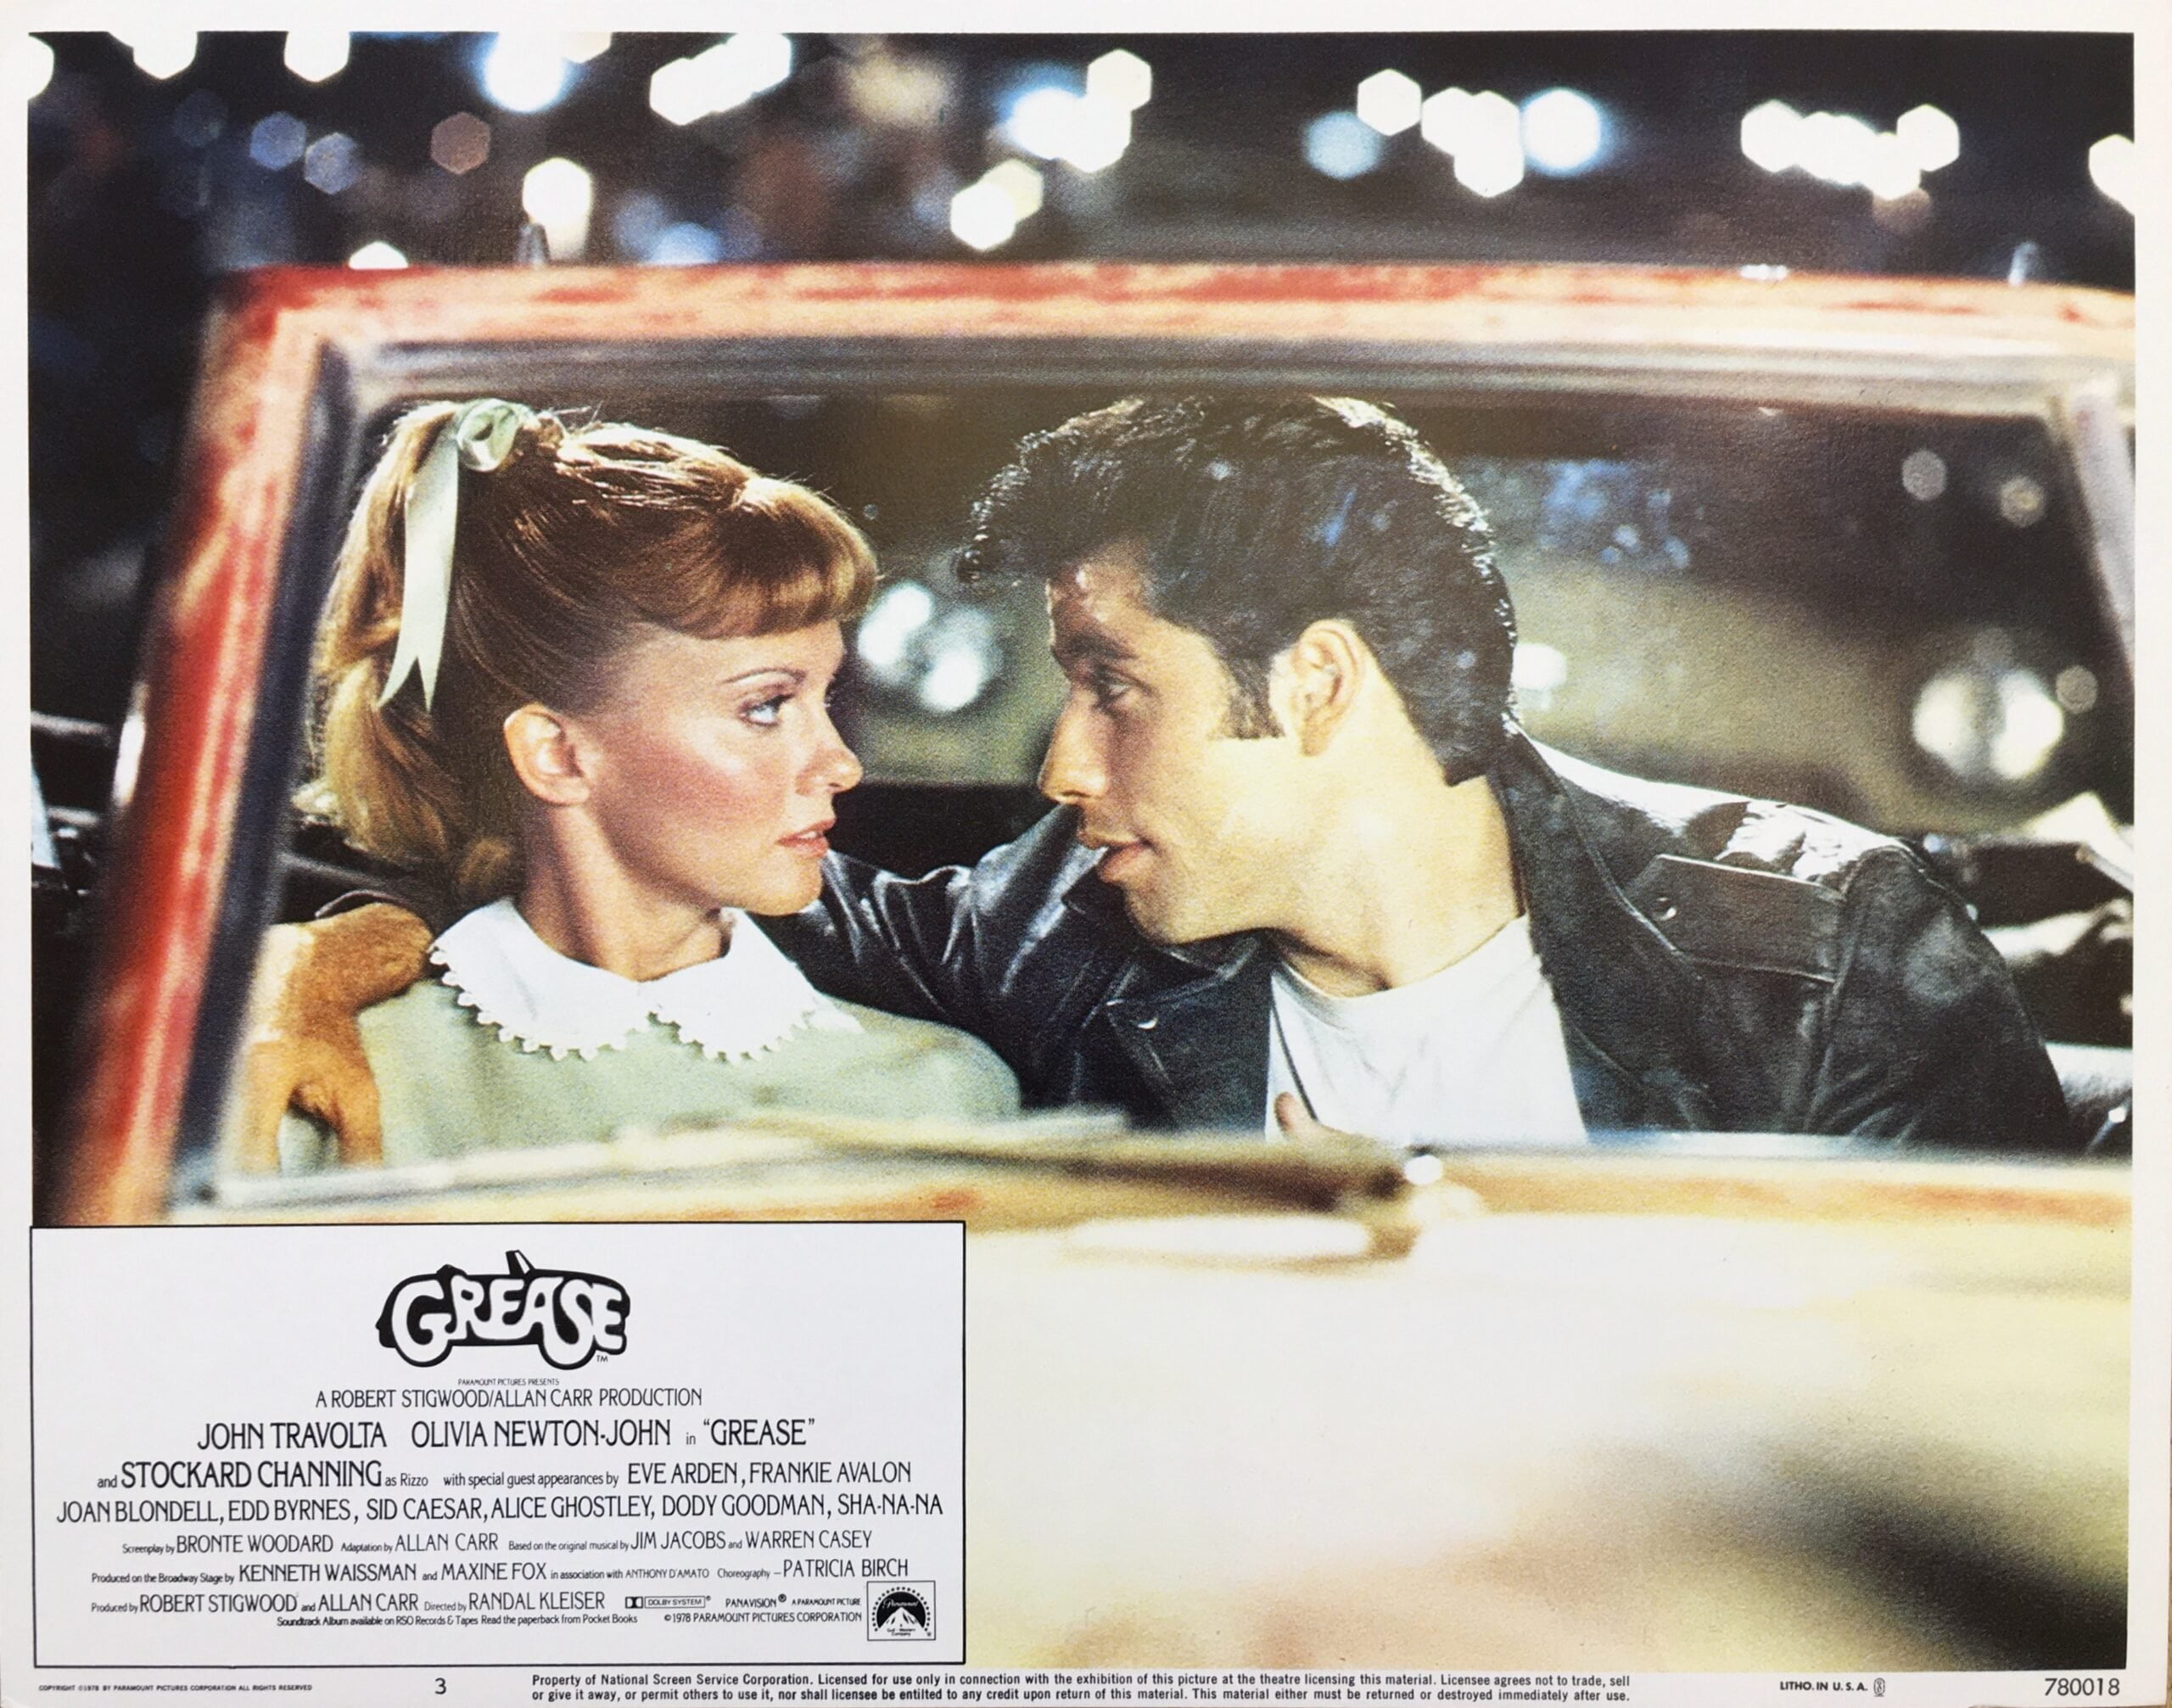 Original vintage cinema lobby card movie poster for the musical, Grease